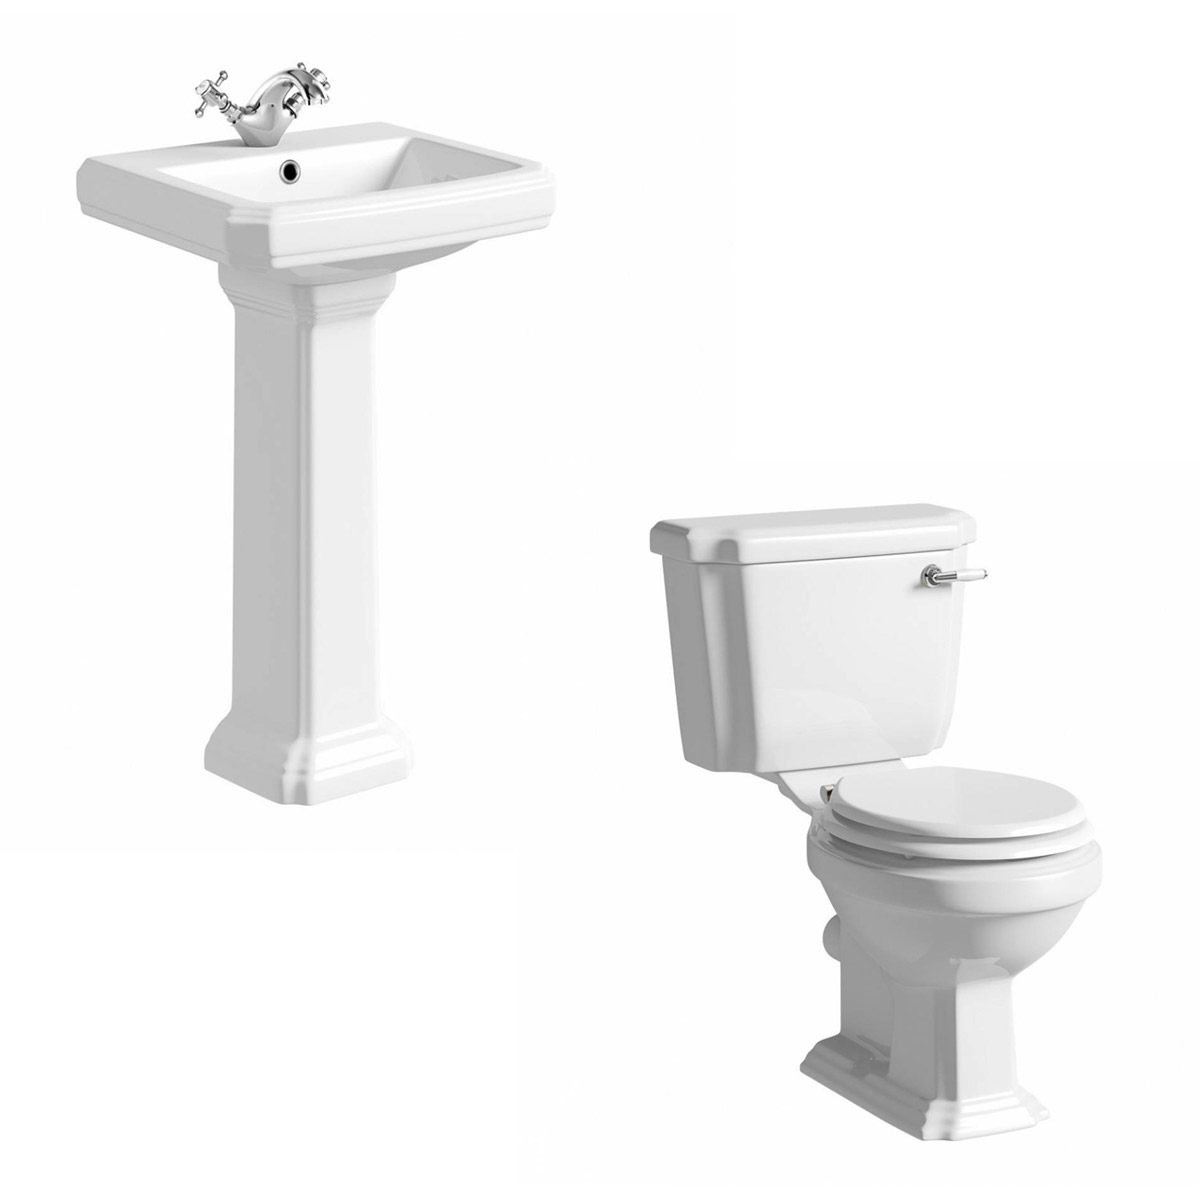 Orchard Dulwich cloakroom suite with white seat and full pedestal basin 571mm